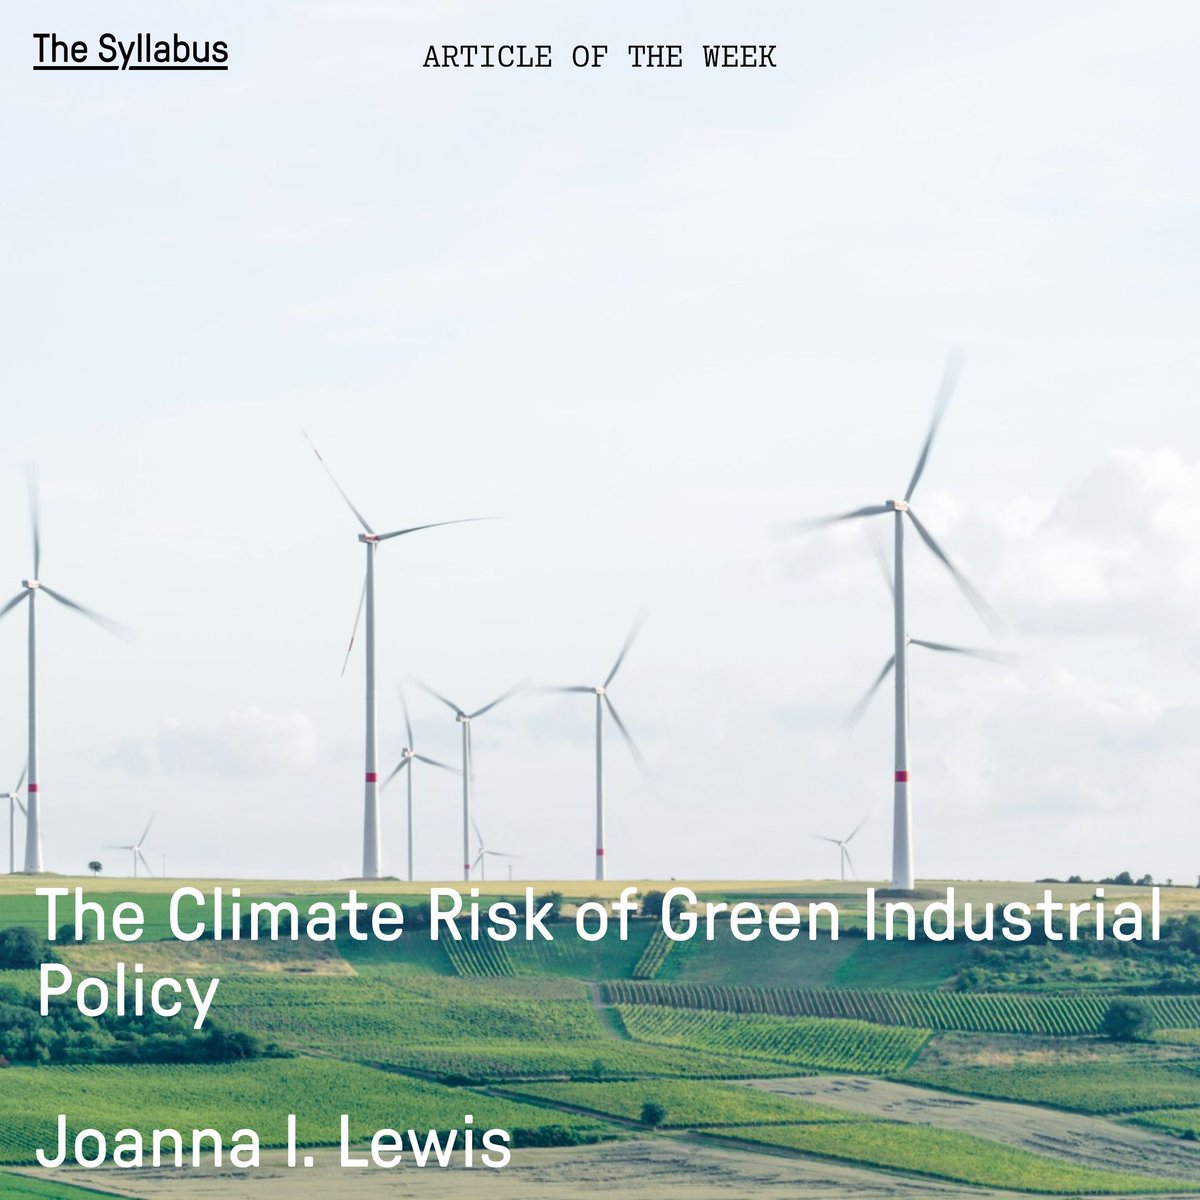 Climate mitigation policies are increasingly reframed as economic and industrial policies. But, as our Open-Access Article of the Week argues, such reframing might be counterproductive. By @JoannaILewis in @CurrentHistory1 buff.ly/481YYty